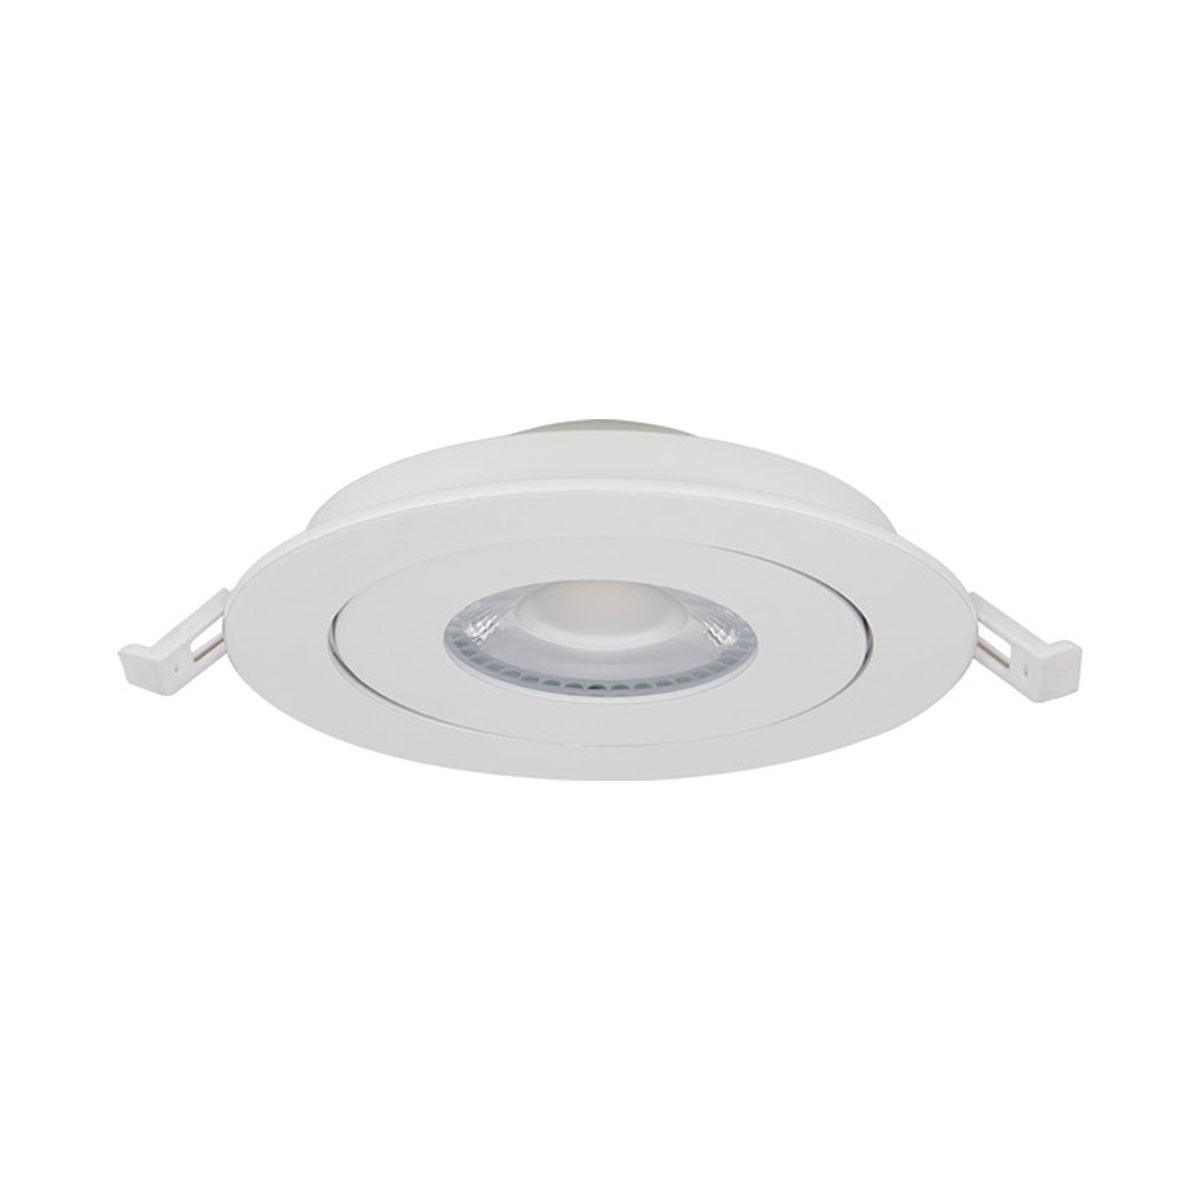 4 Inch Gimbal Canless LED Recessed Light, Round, 9 Watt, 750 Lumens, Selectable CCT, 2700K to 5000K, Remote Driver, White Finish